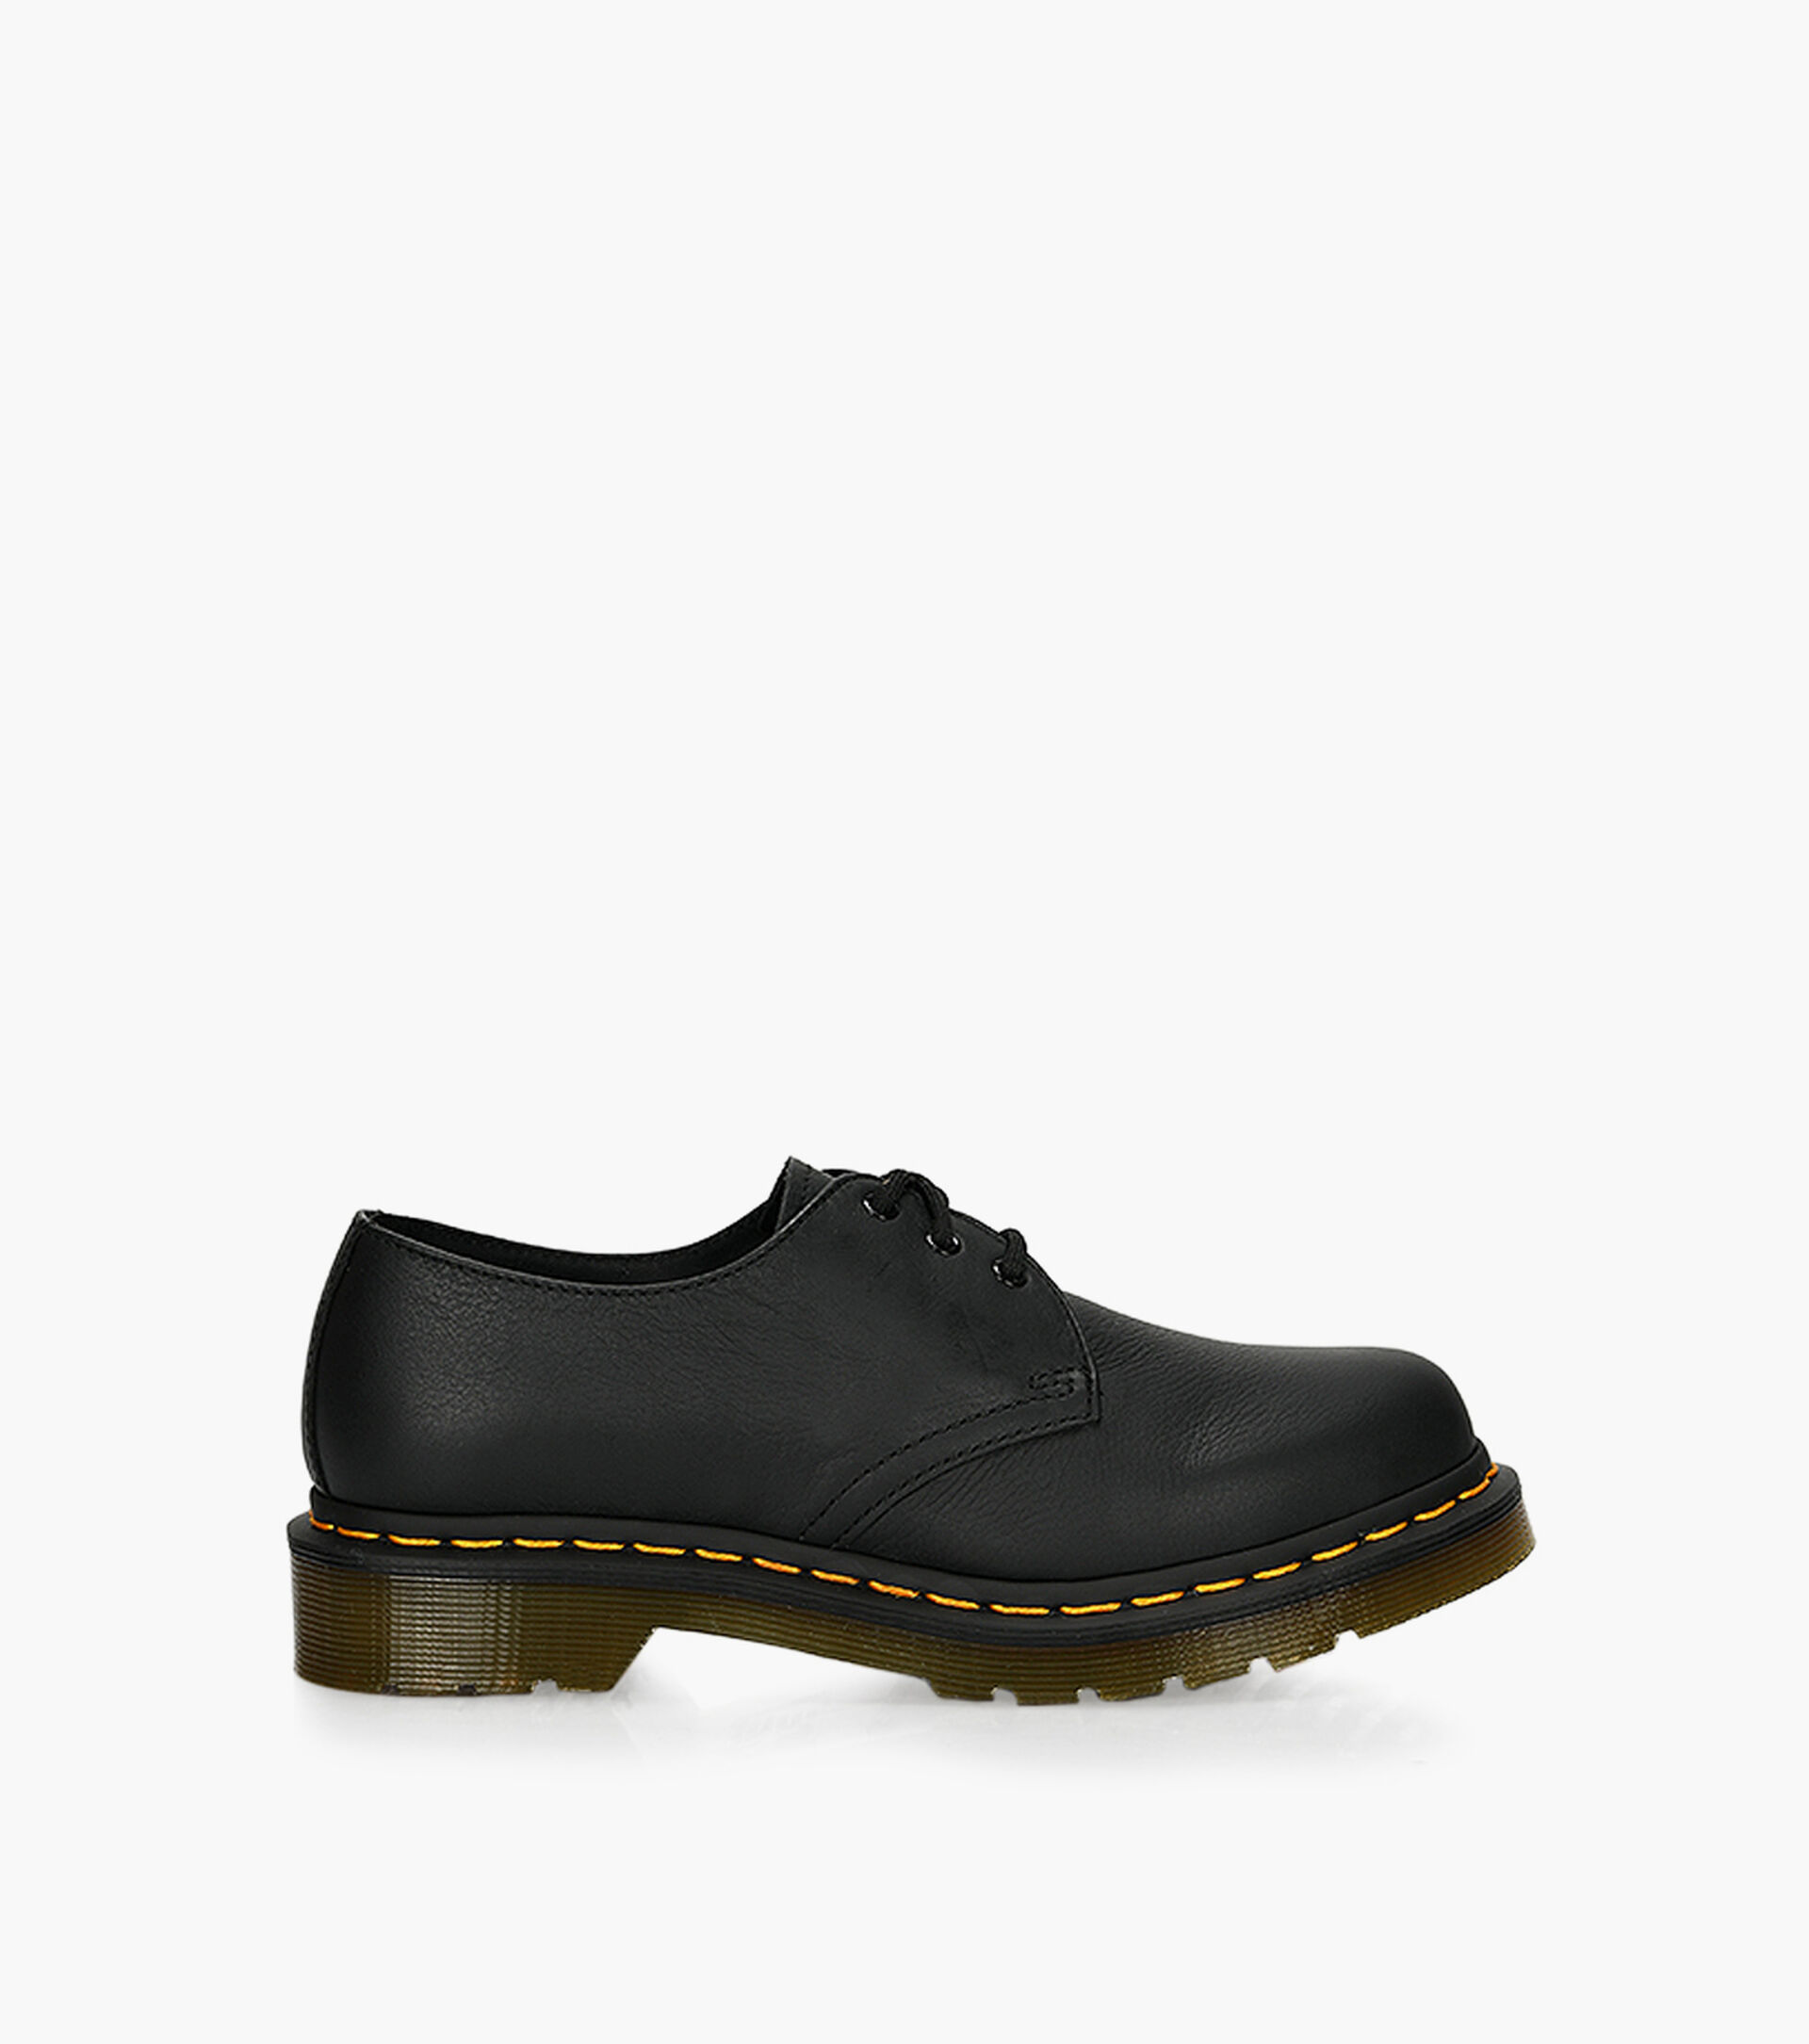 DR. MARTENS 1461 OXFORD - Black Leather | Browns Shoes